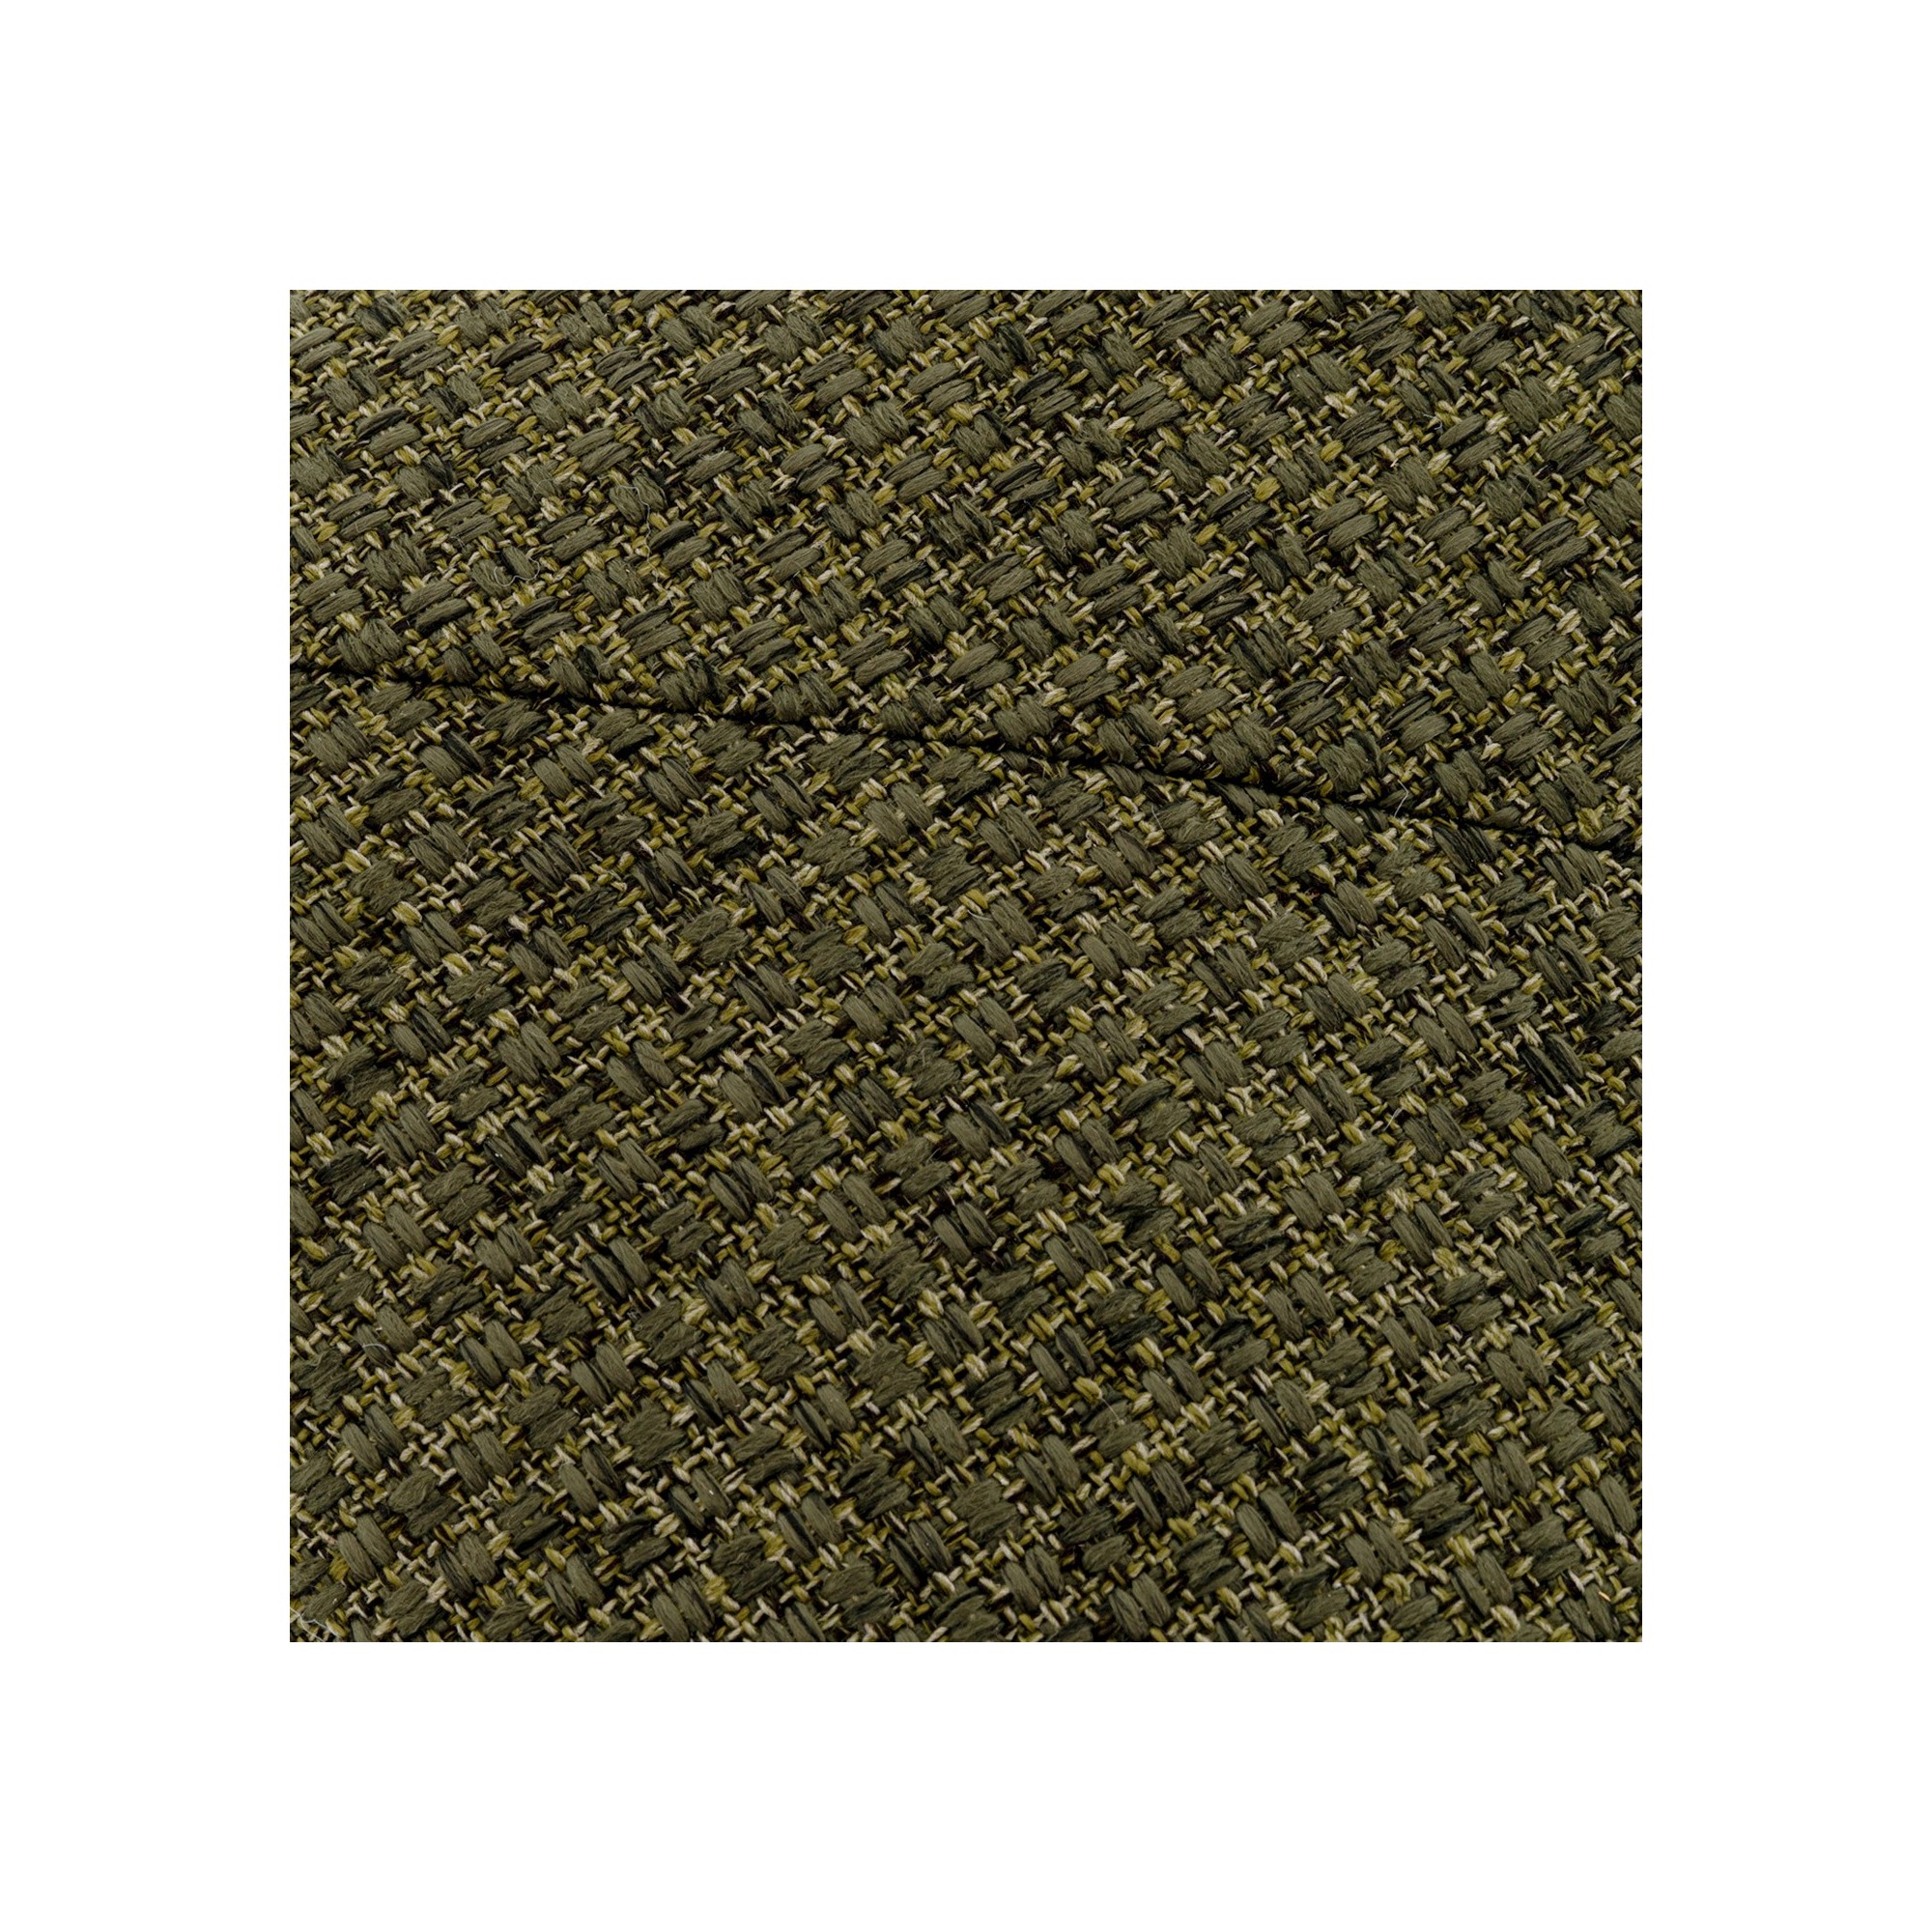 Fabric Swatch Dolce green 10x10cm Kare Design